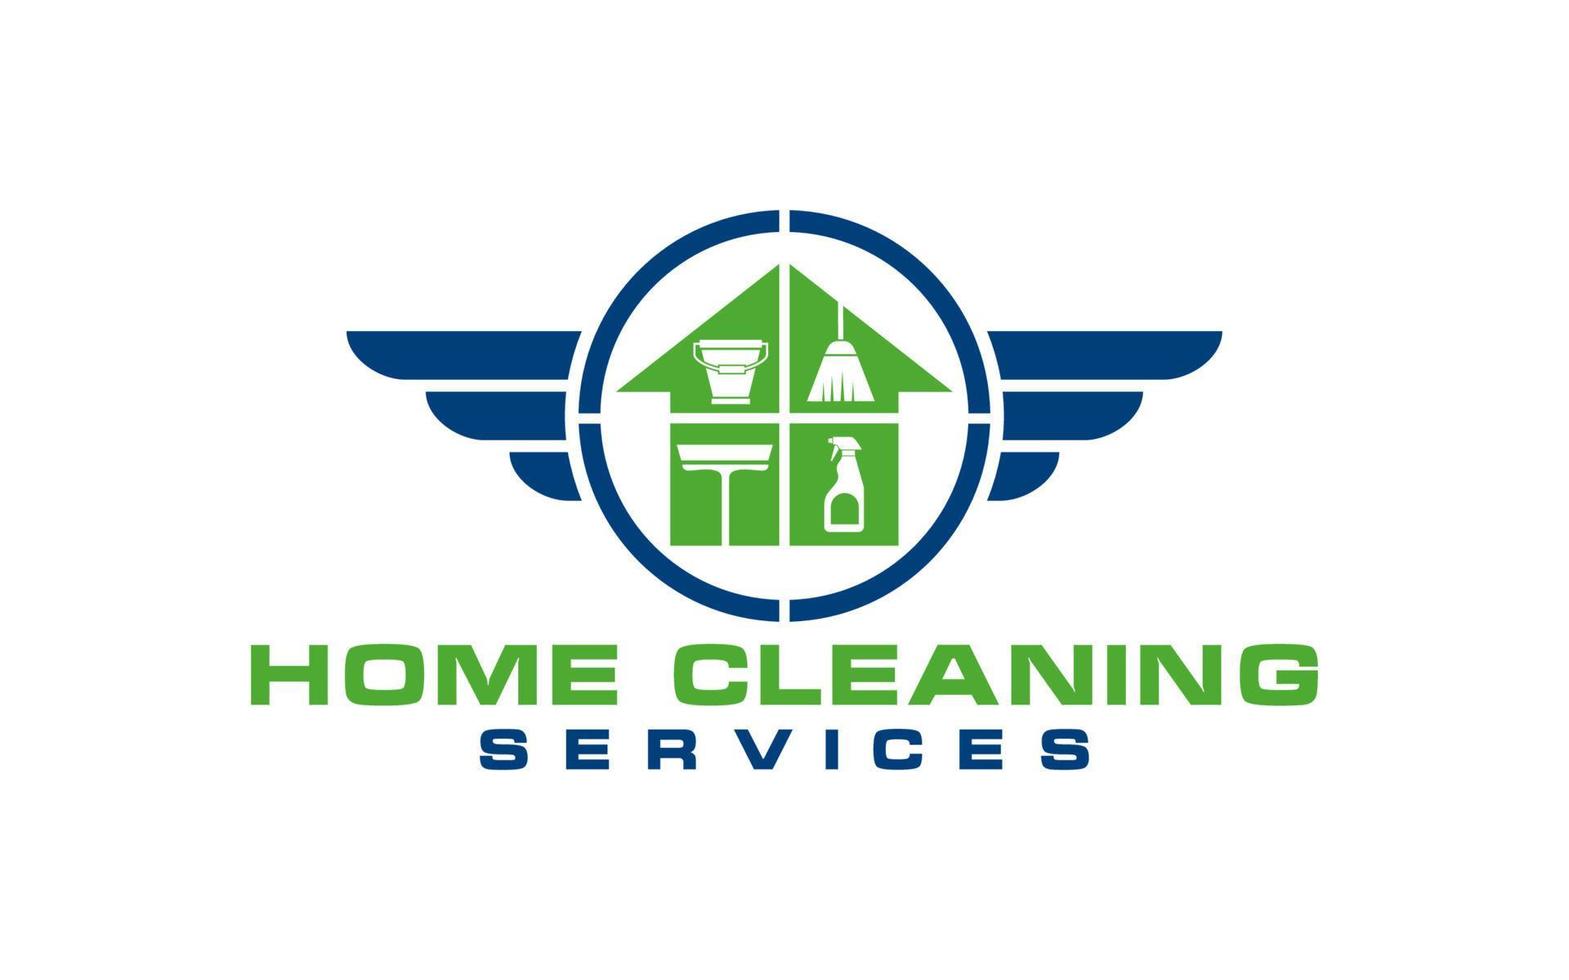 Creative Cleaning home services Concept Logo Design Template vector